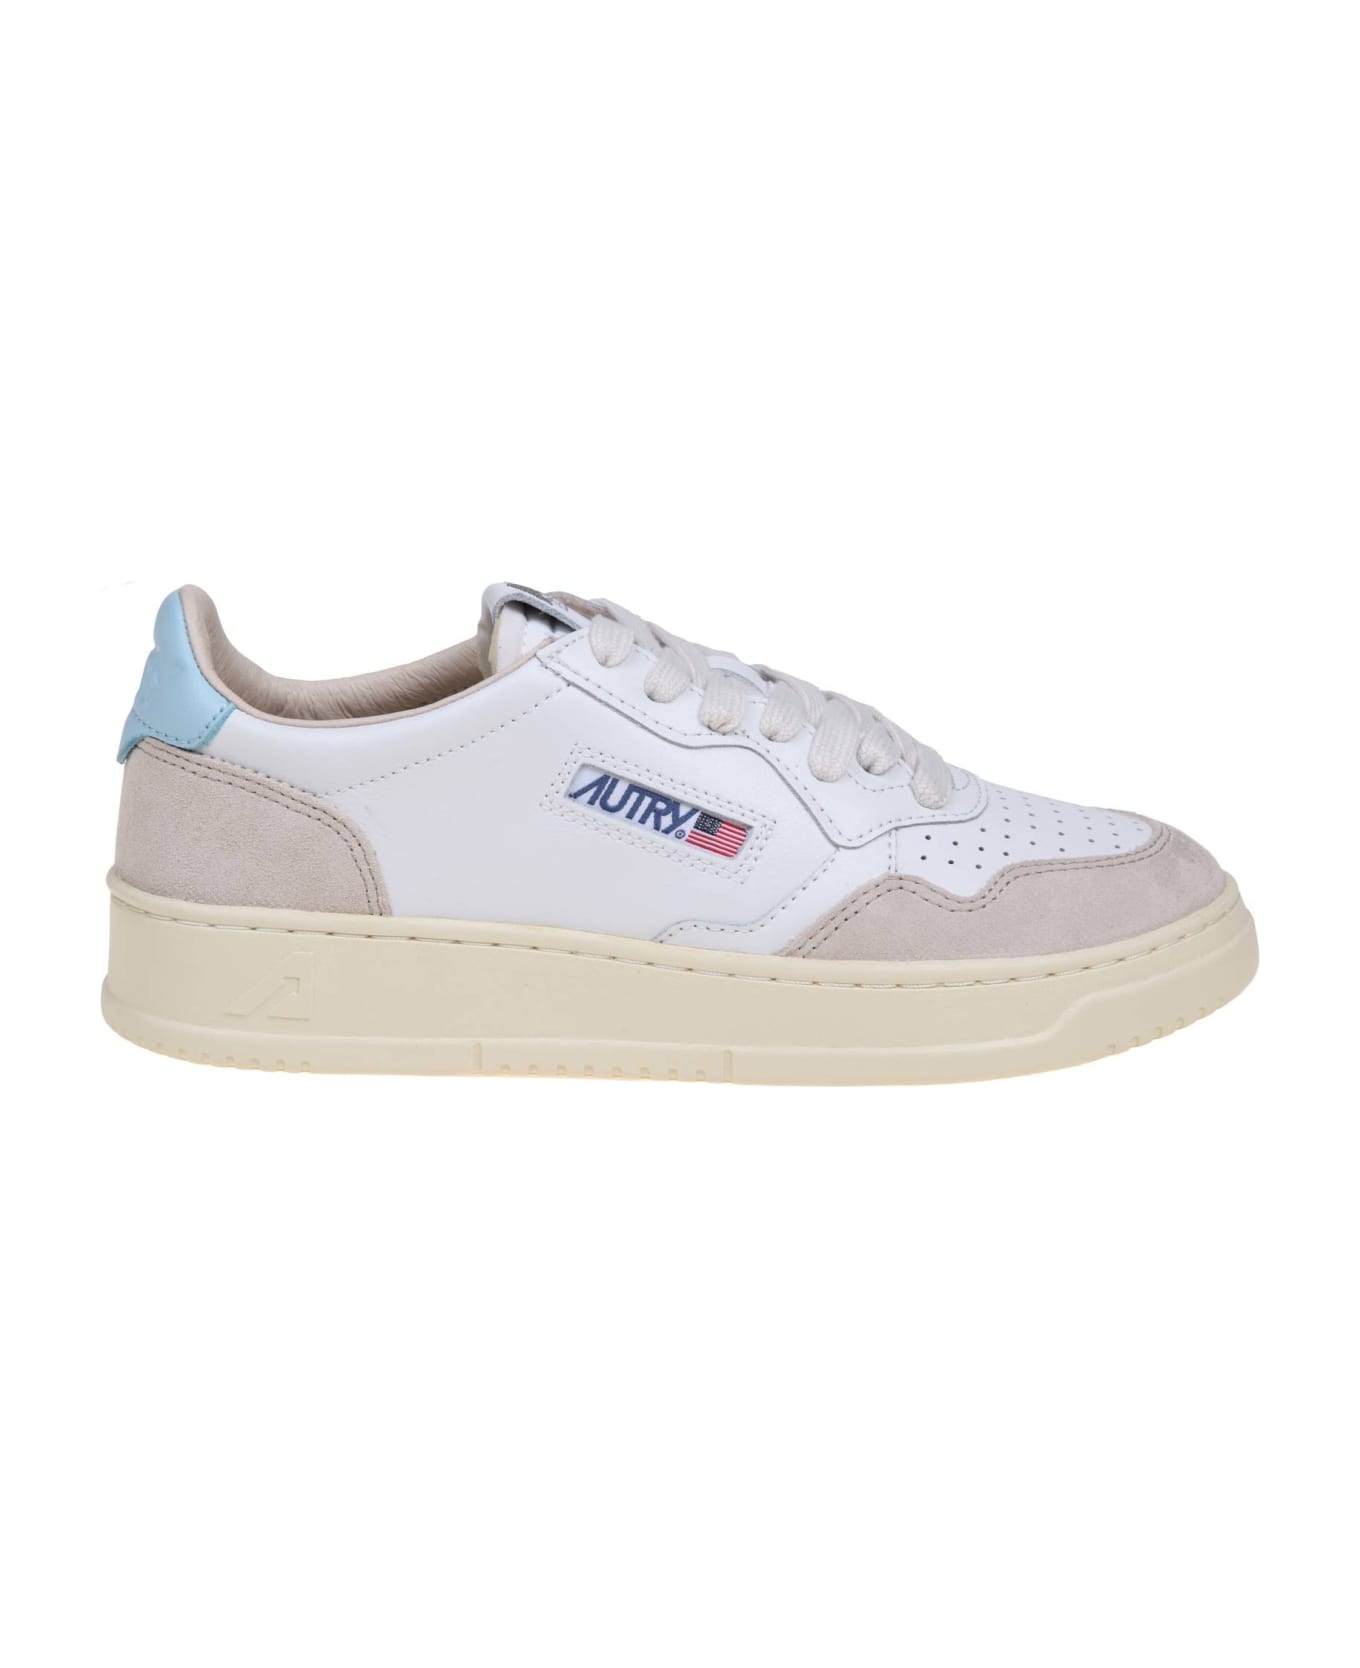 Autry White And Light Blue Leather Sneakers - Clear Blue